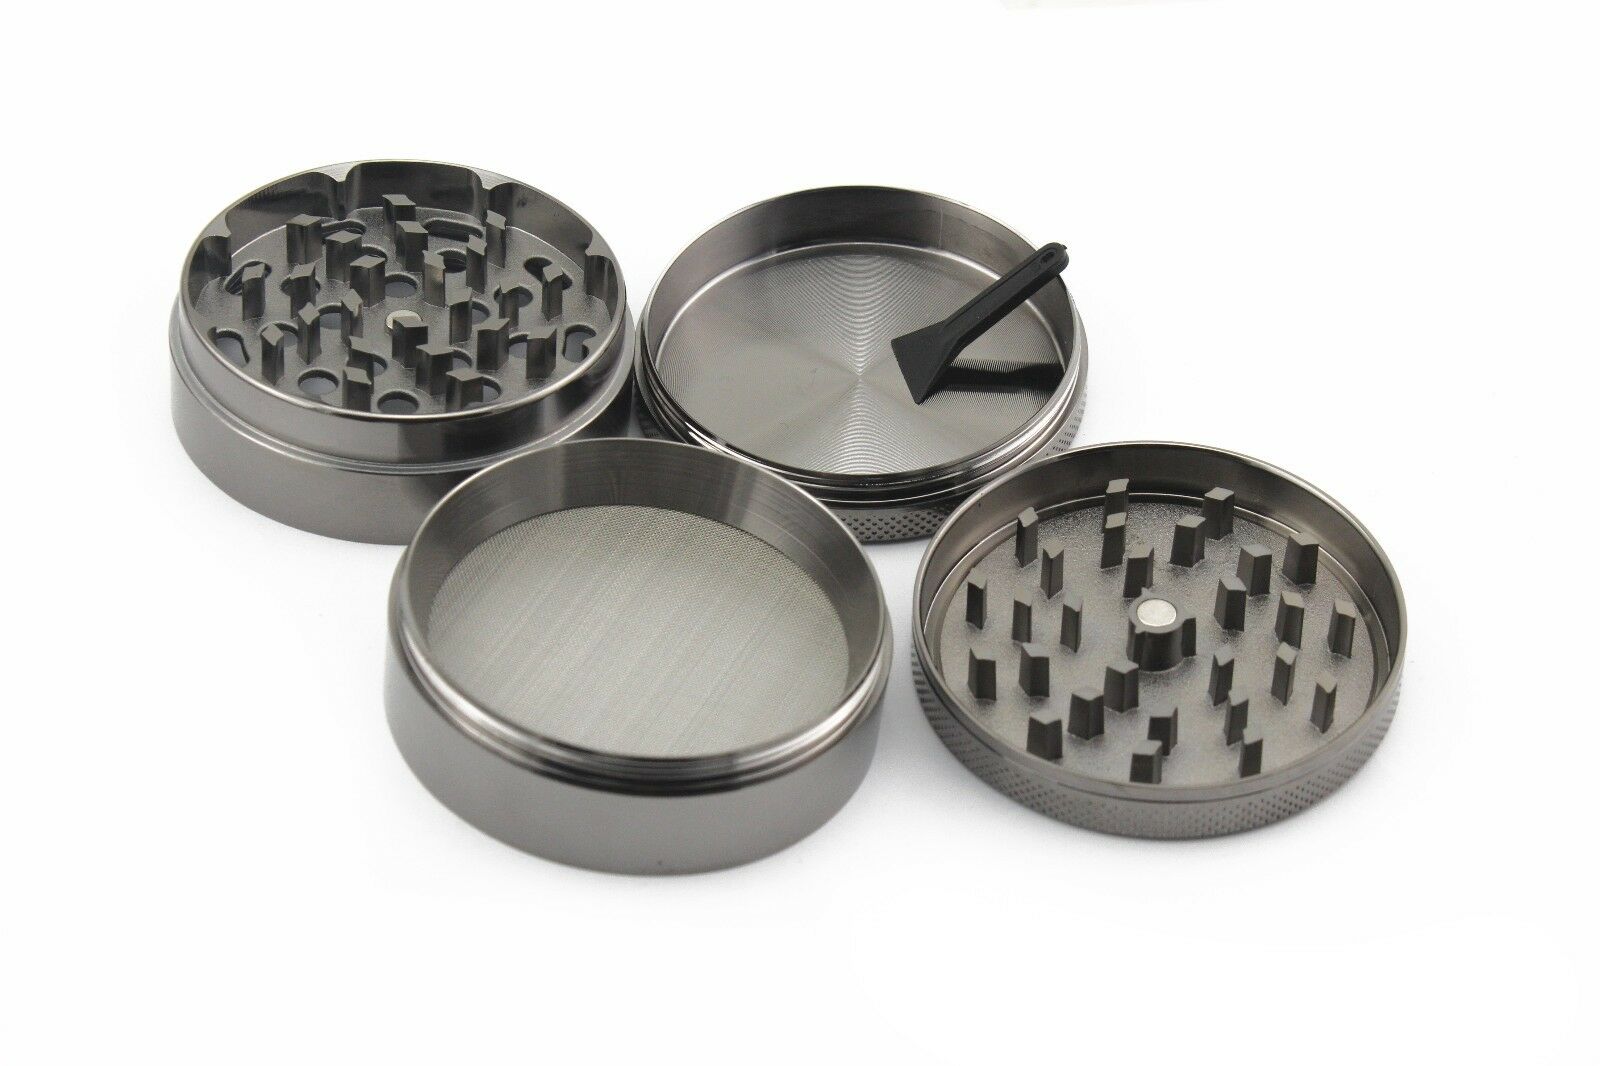 4 Piece Magnetic 2.5 Inch Black Tobacco Herb Grinder Spice Zinc Alloy With Scoop